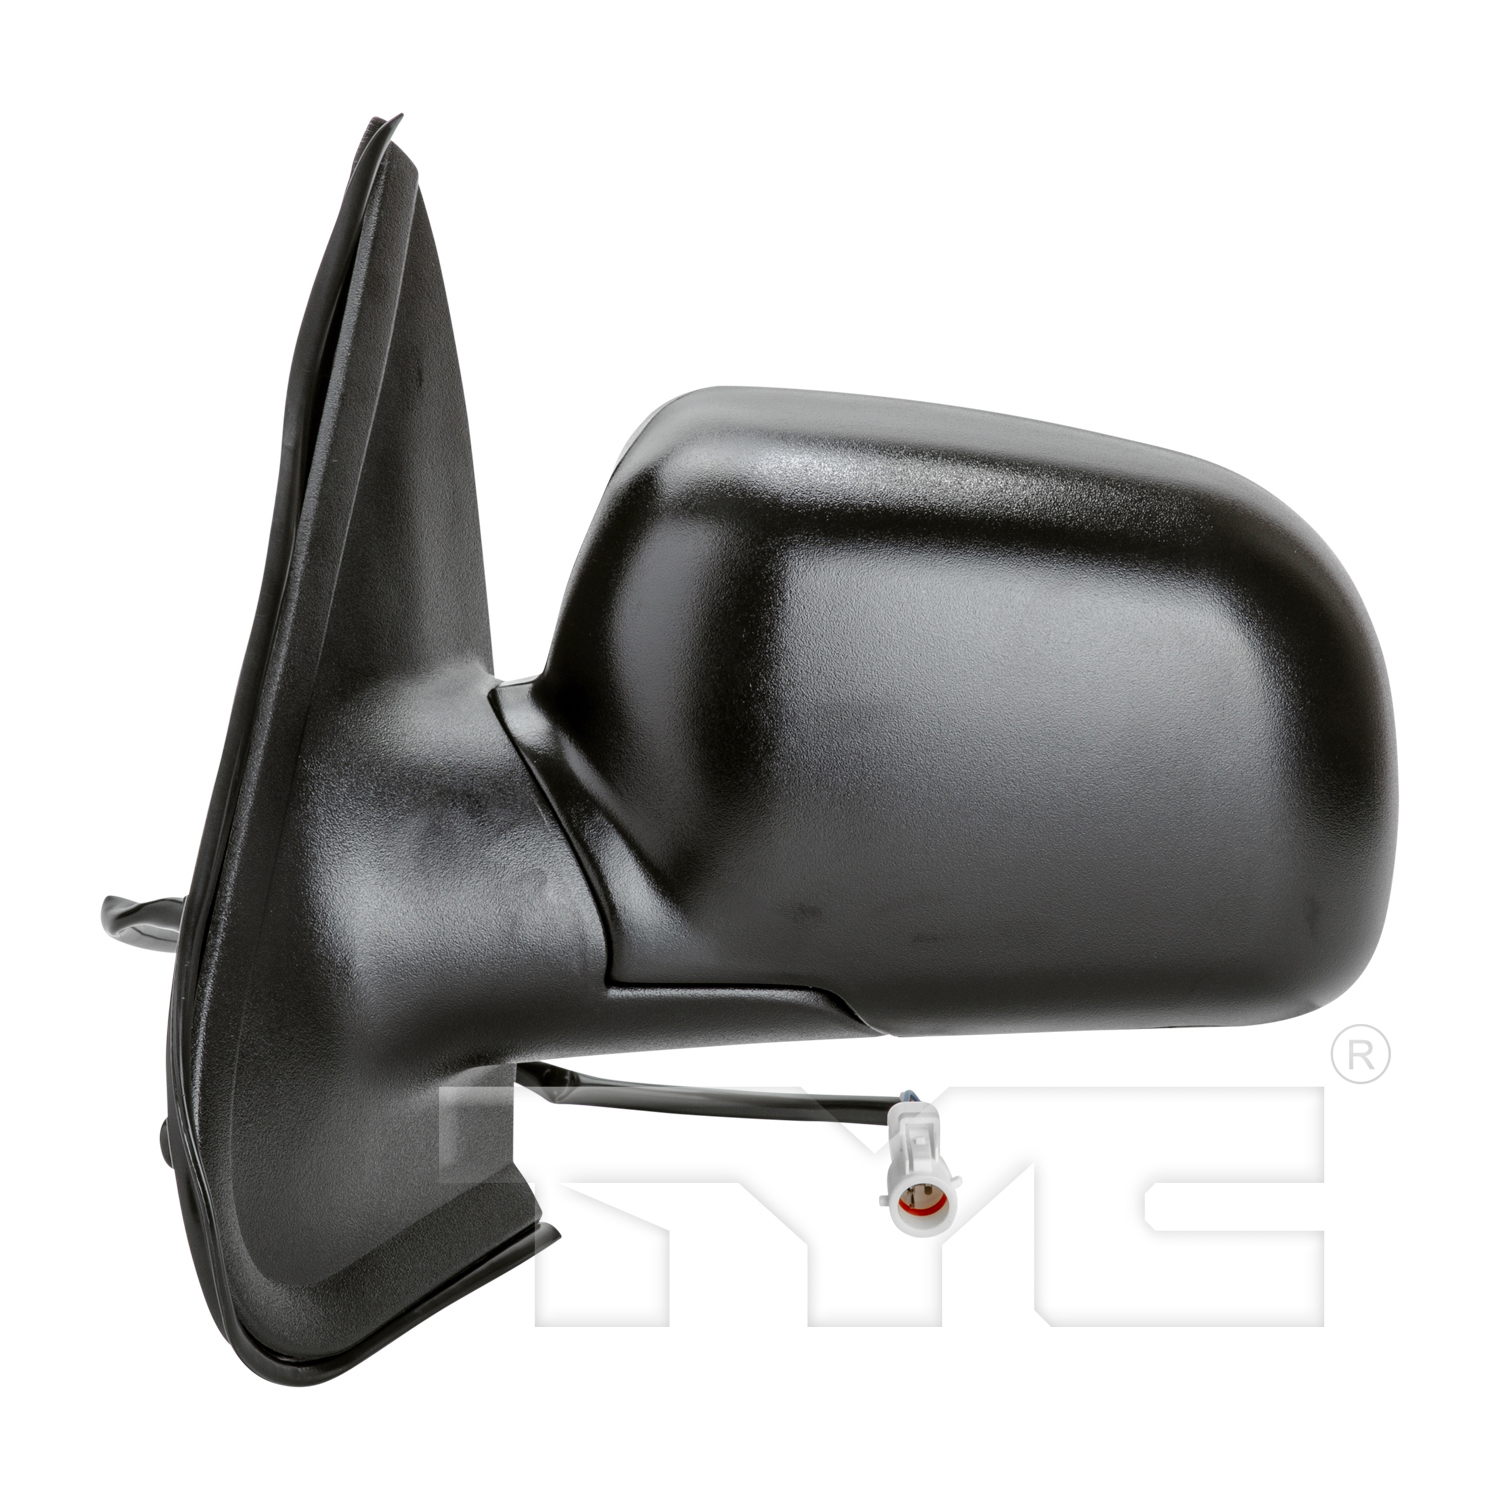 Aftermarket MIRRORS for FORD - EXPLORER, EXPLORER,95-01,LT Mirror outside rear view